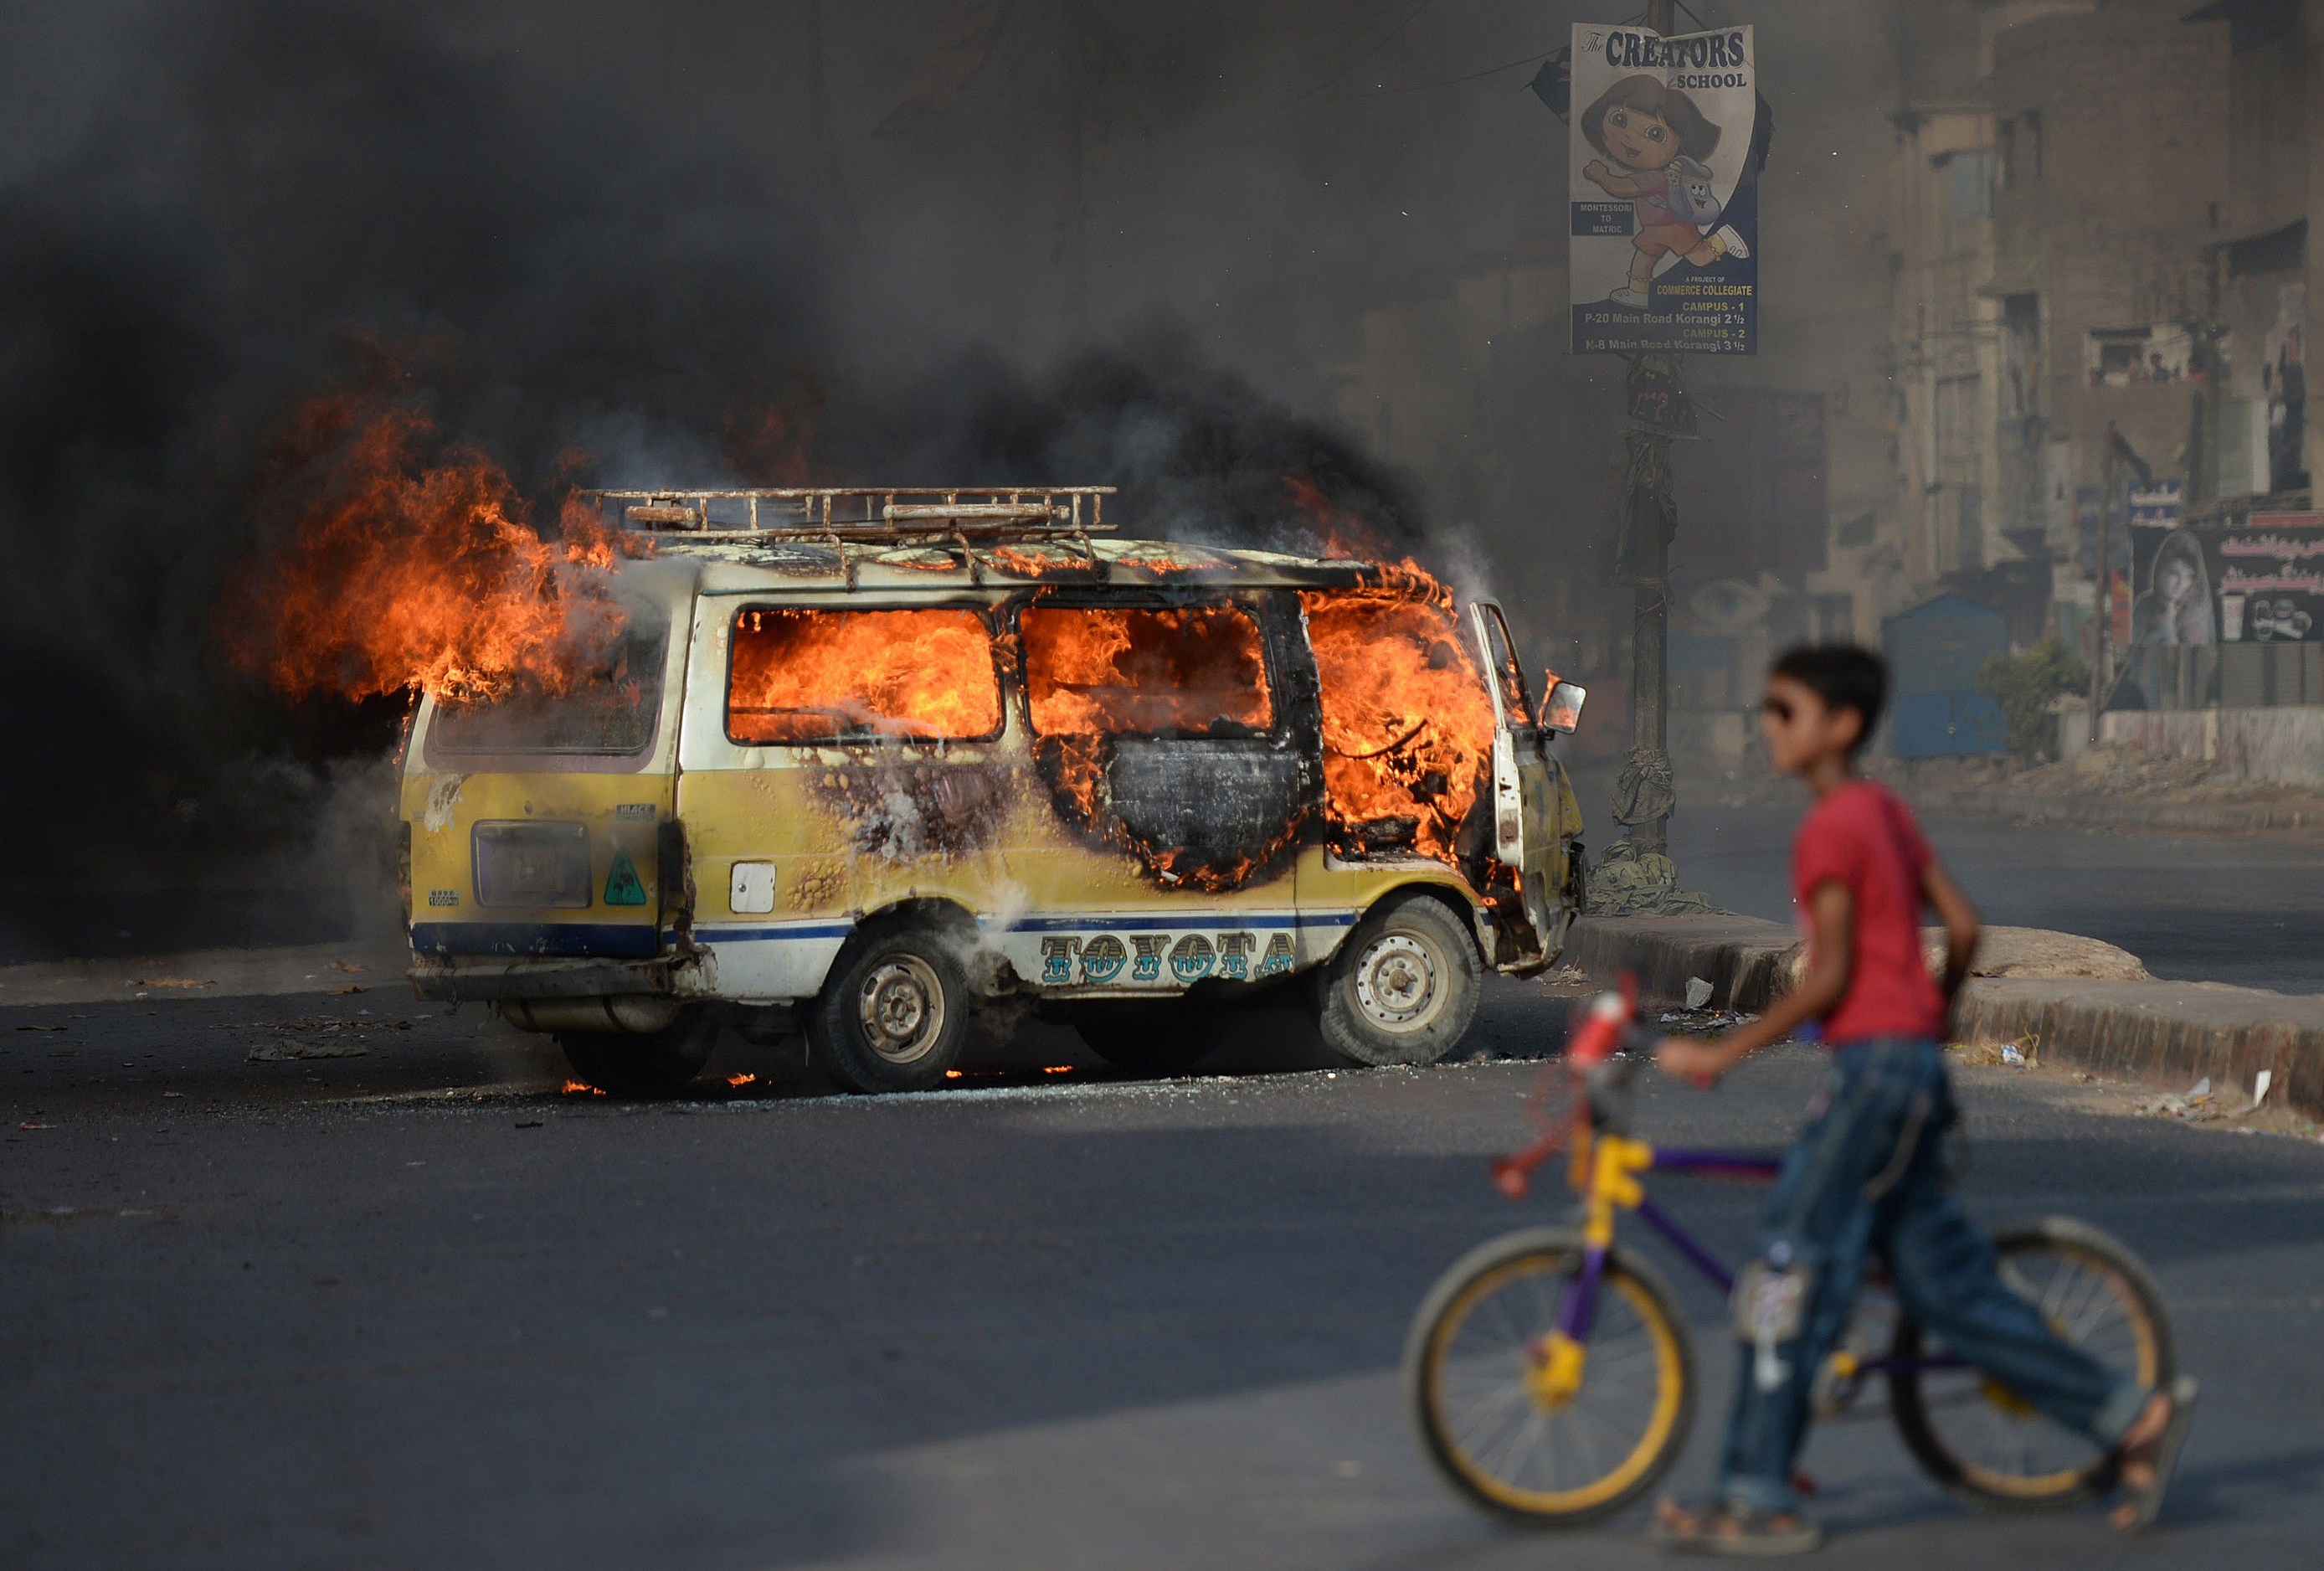 A Pakistani youth wheels his bicycle past a burning vehicle on a street in Karachi on June 3, 2014 following the arrest of Altaf Hussain, head of Pakistan&#039;s Muttahida Qaumi Movement (MQM) par